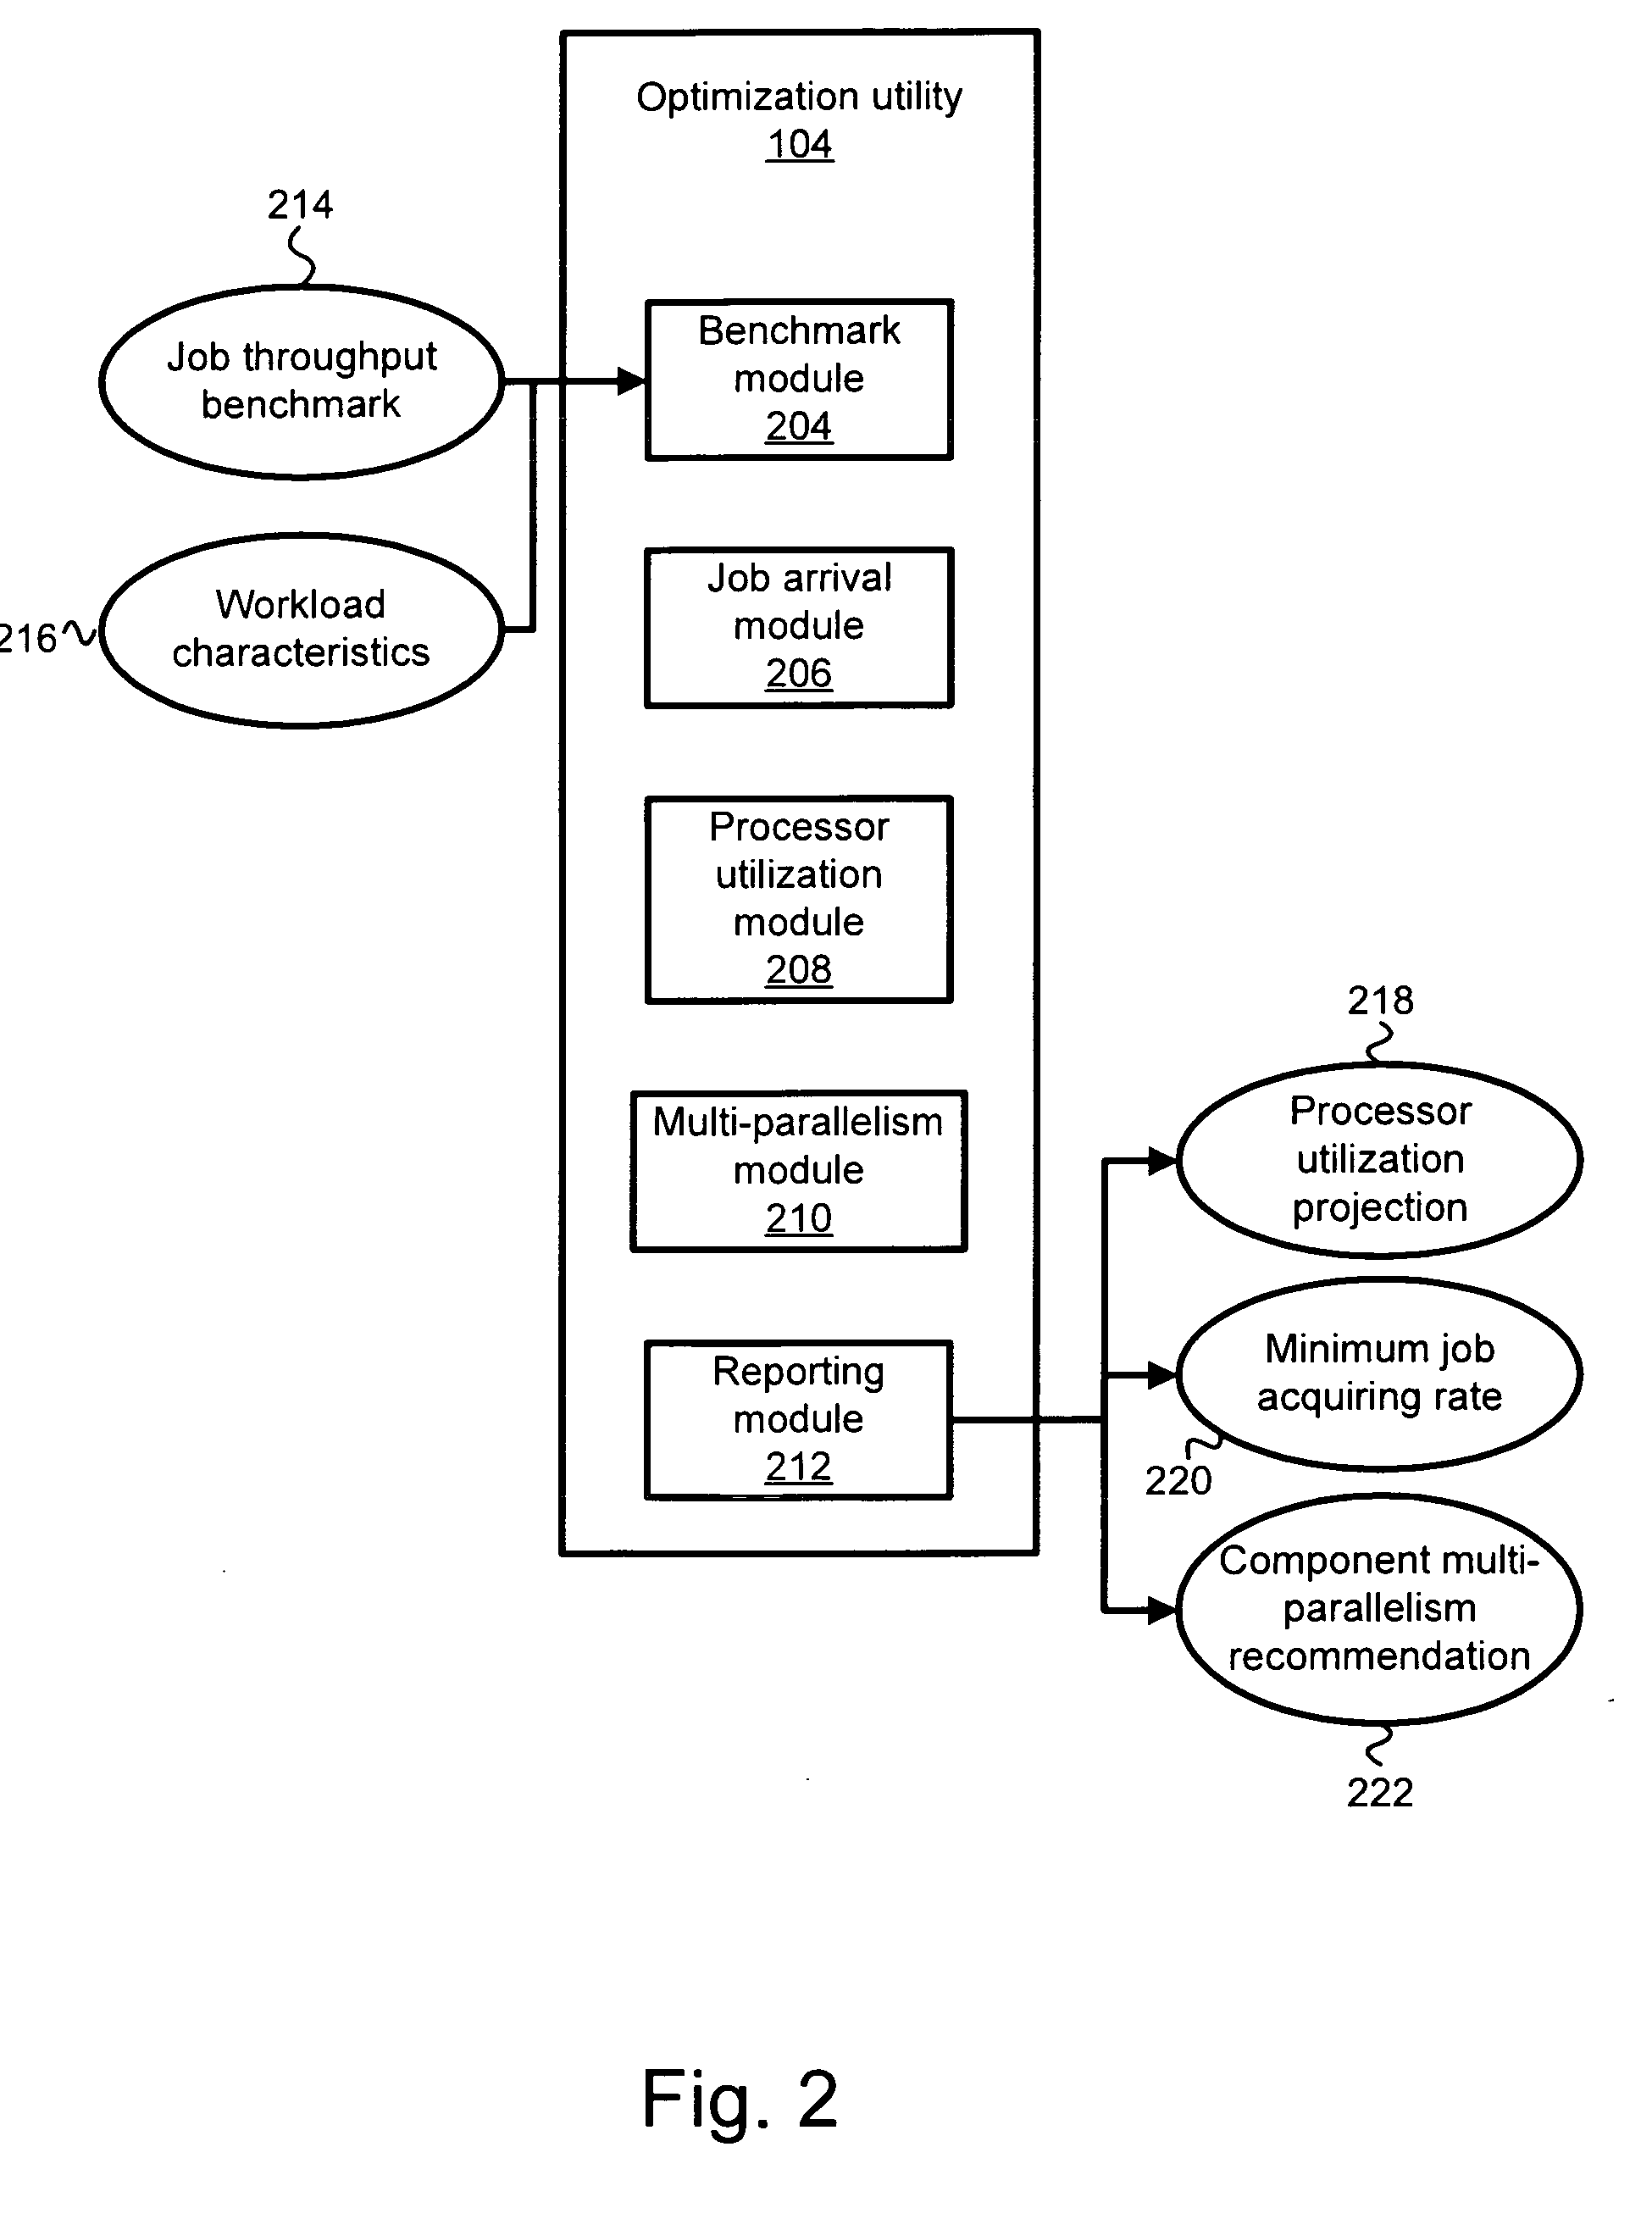 Apparatus, system, and method for modeling, projecting, and optimizing an enterprise application system